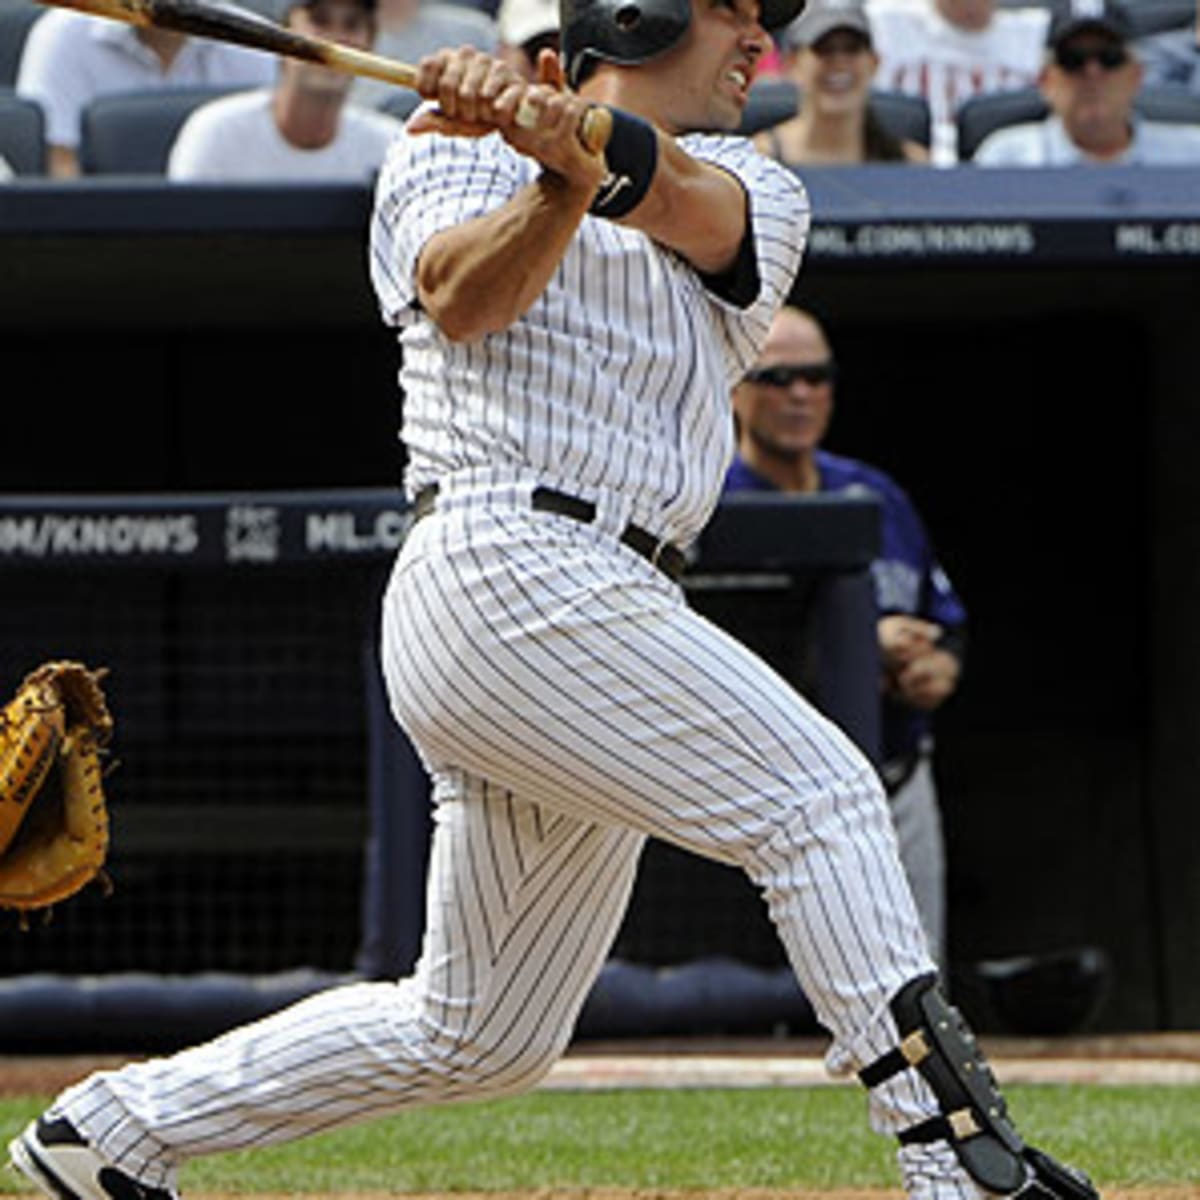 Jorge Posada Stats & Facts - This Day In Baseball